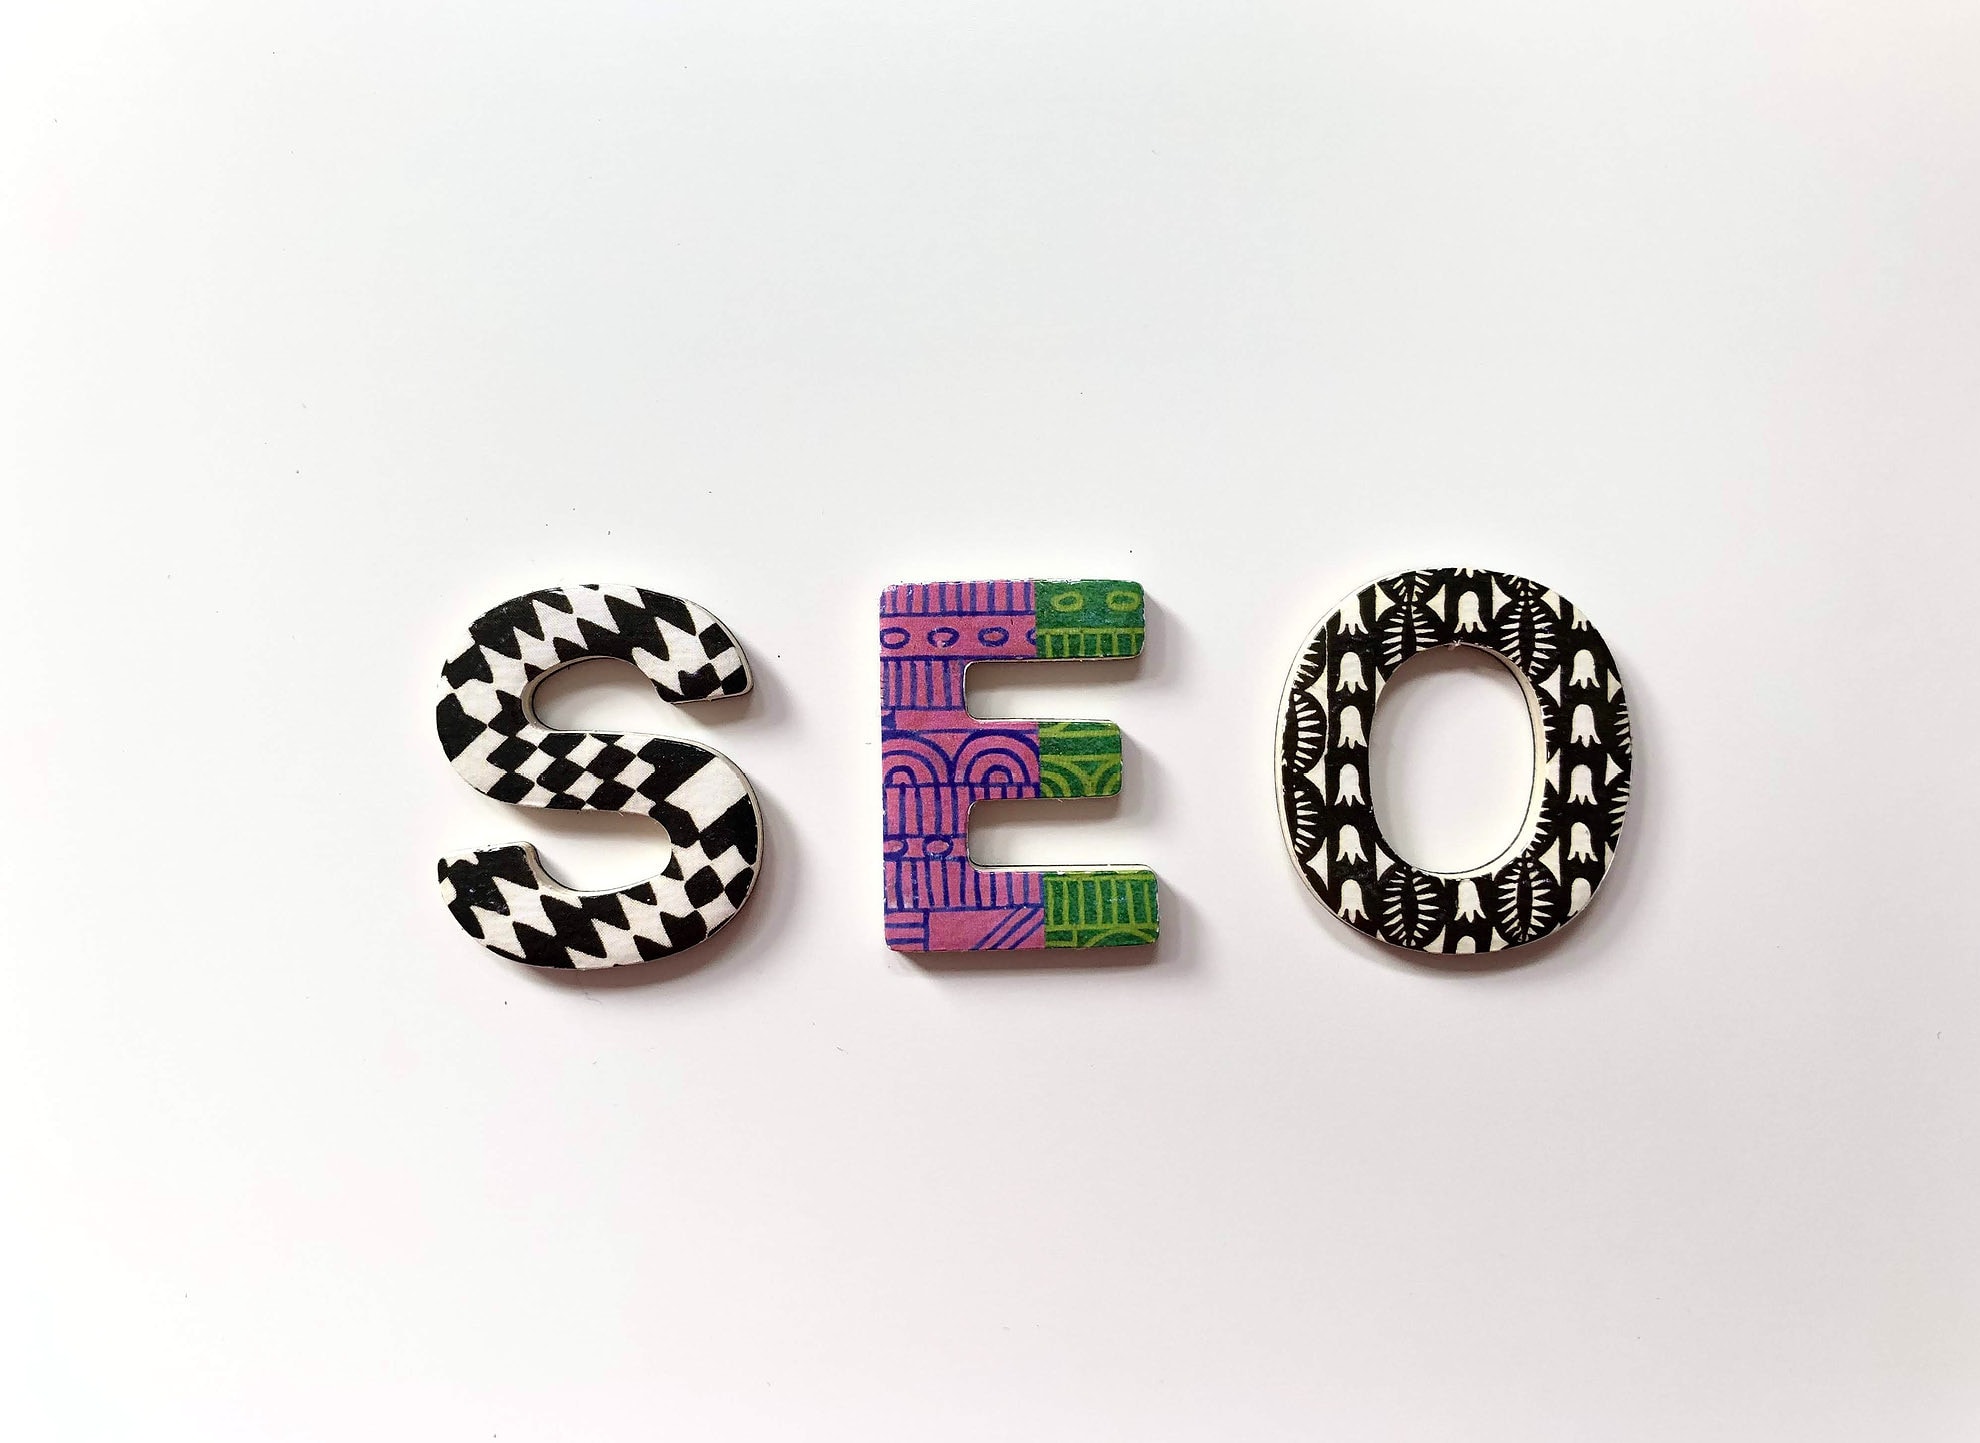 boost your seo